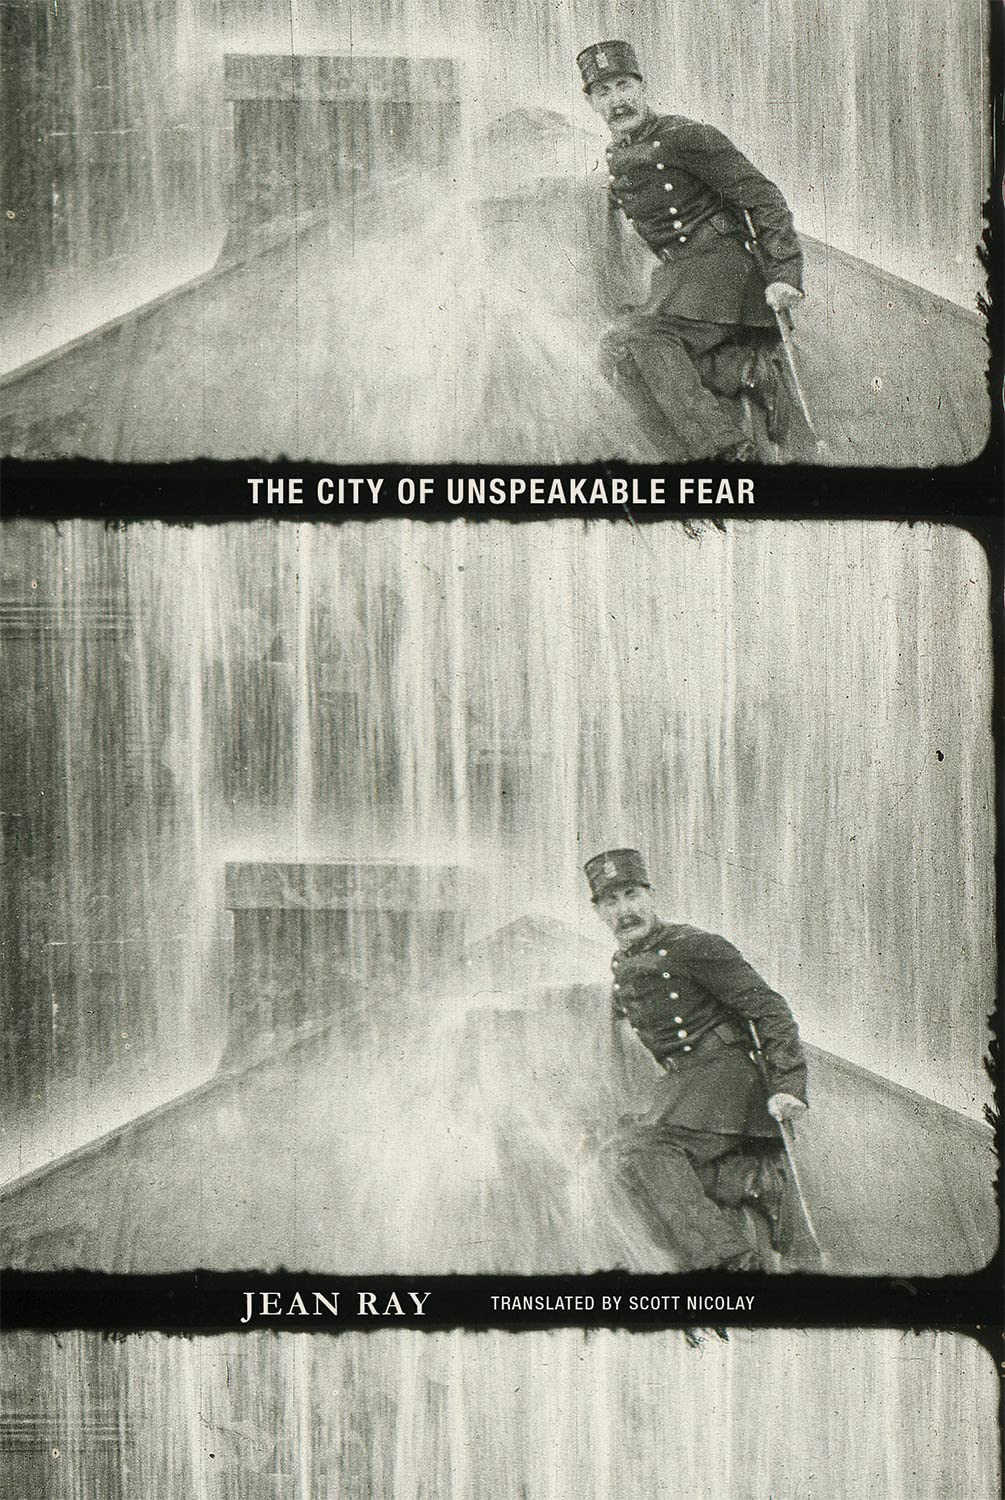 The City of Unspeakable Fear by Jean Ray